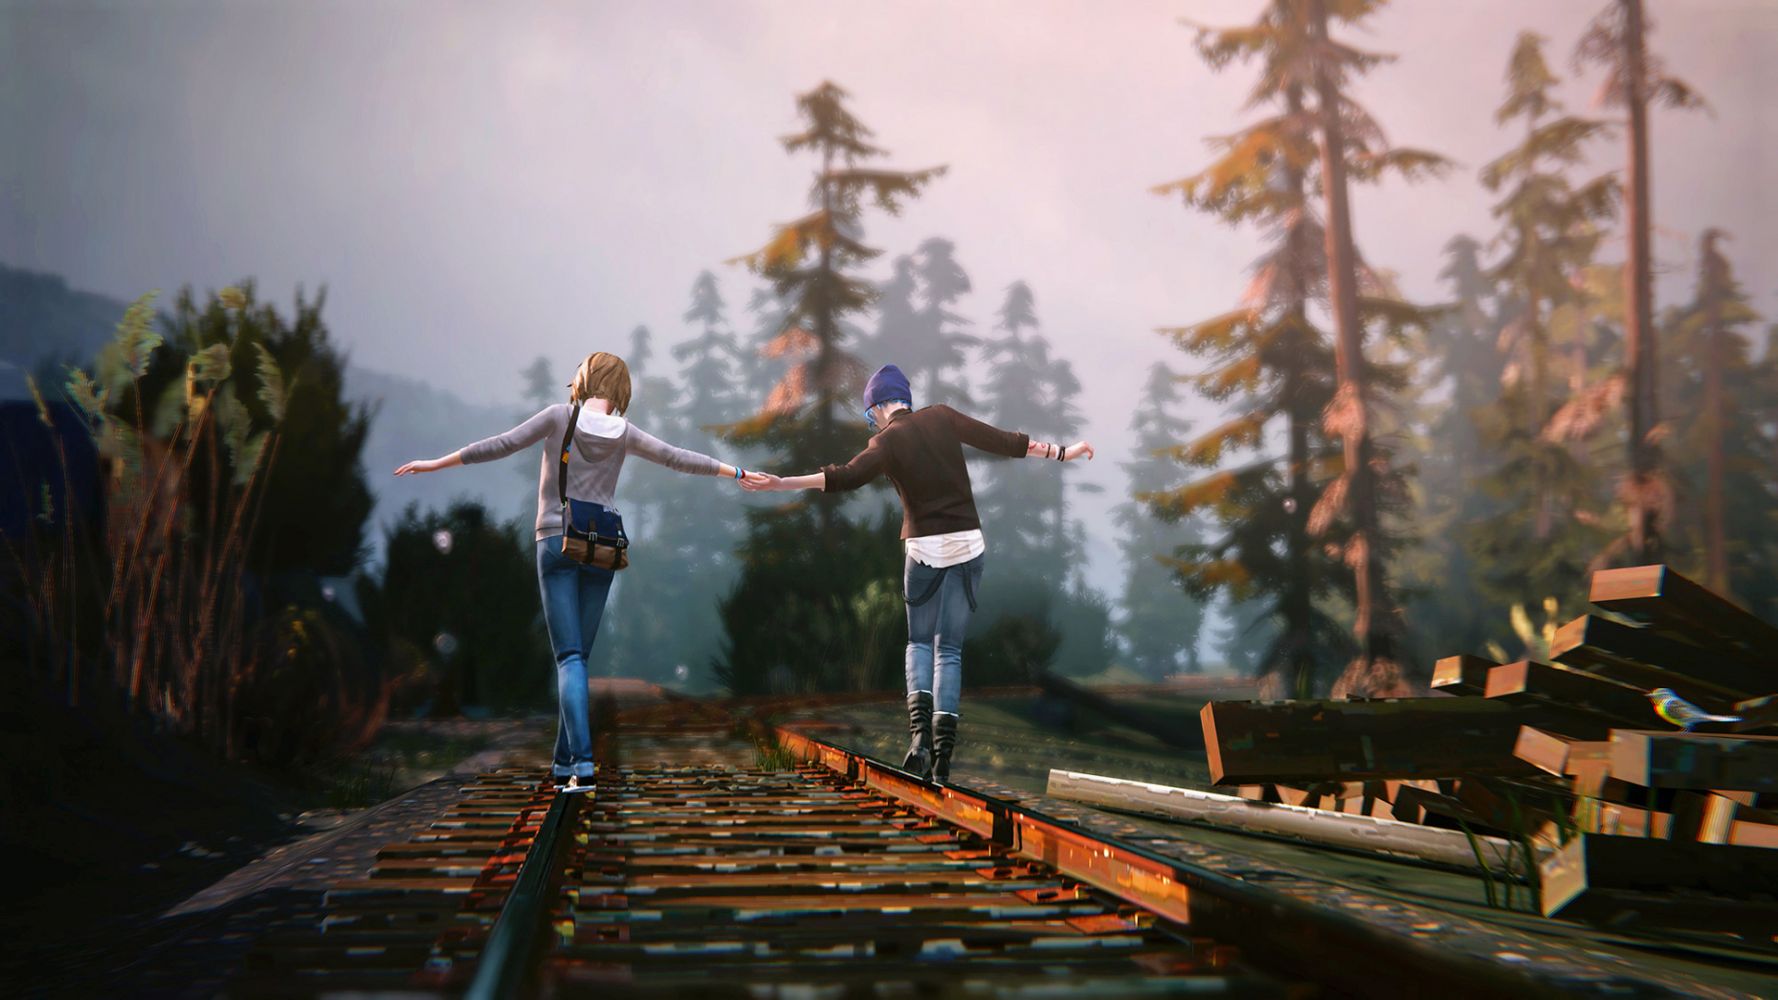 download life is strange 2 ps4 for free